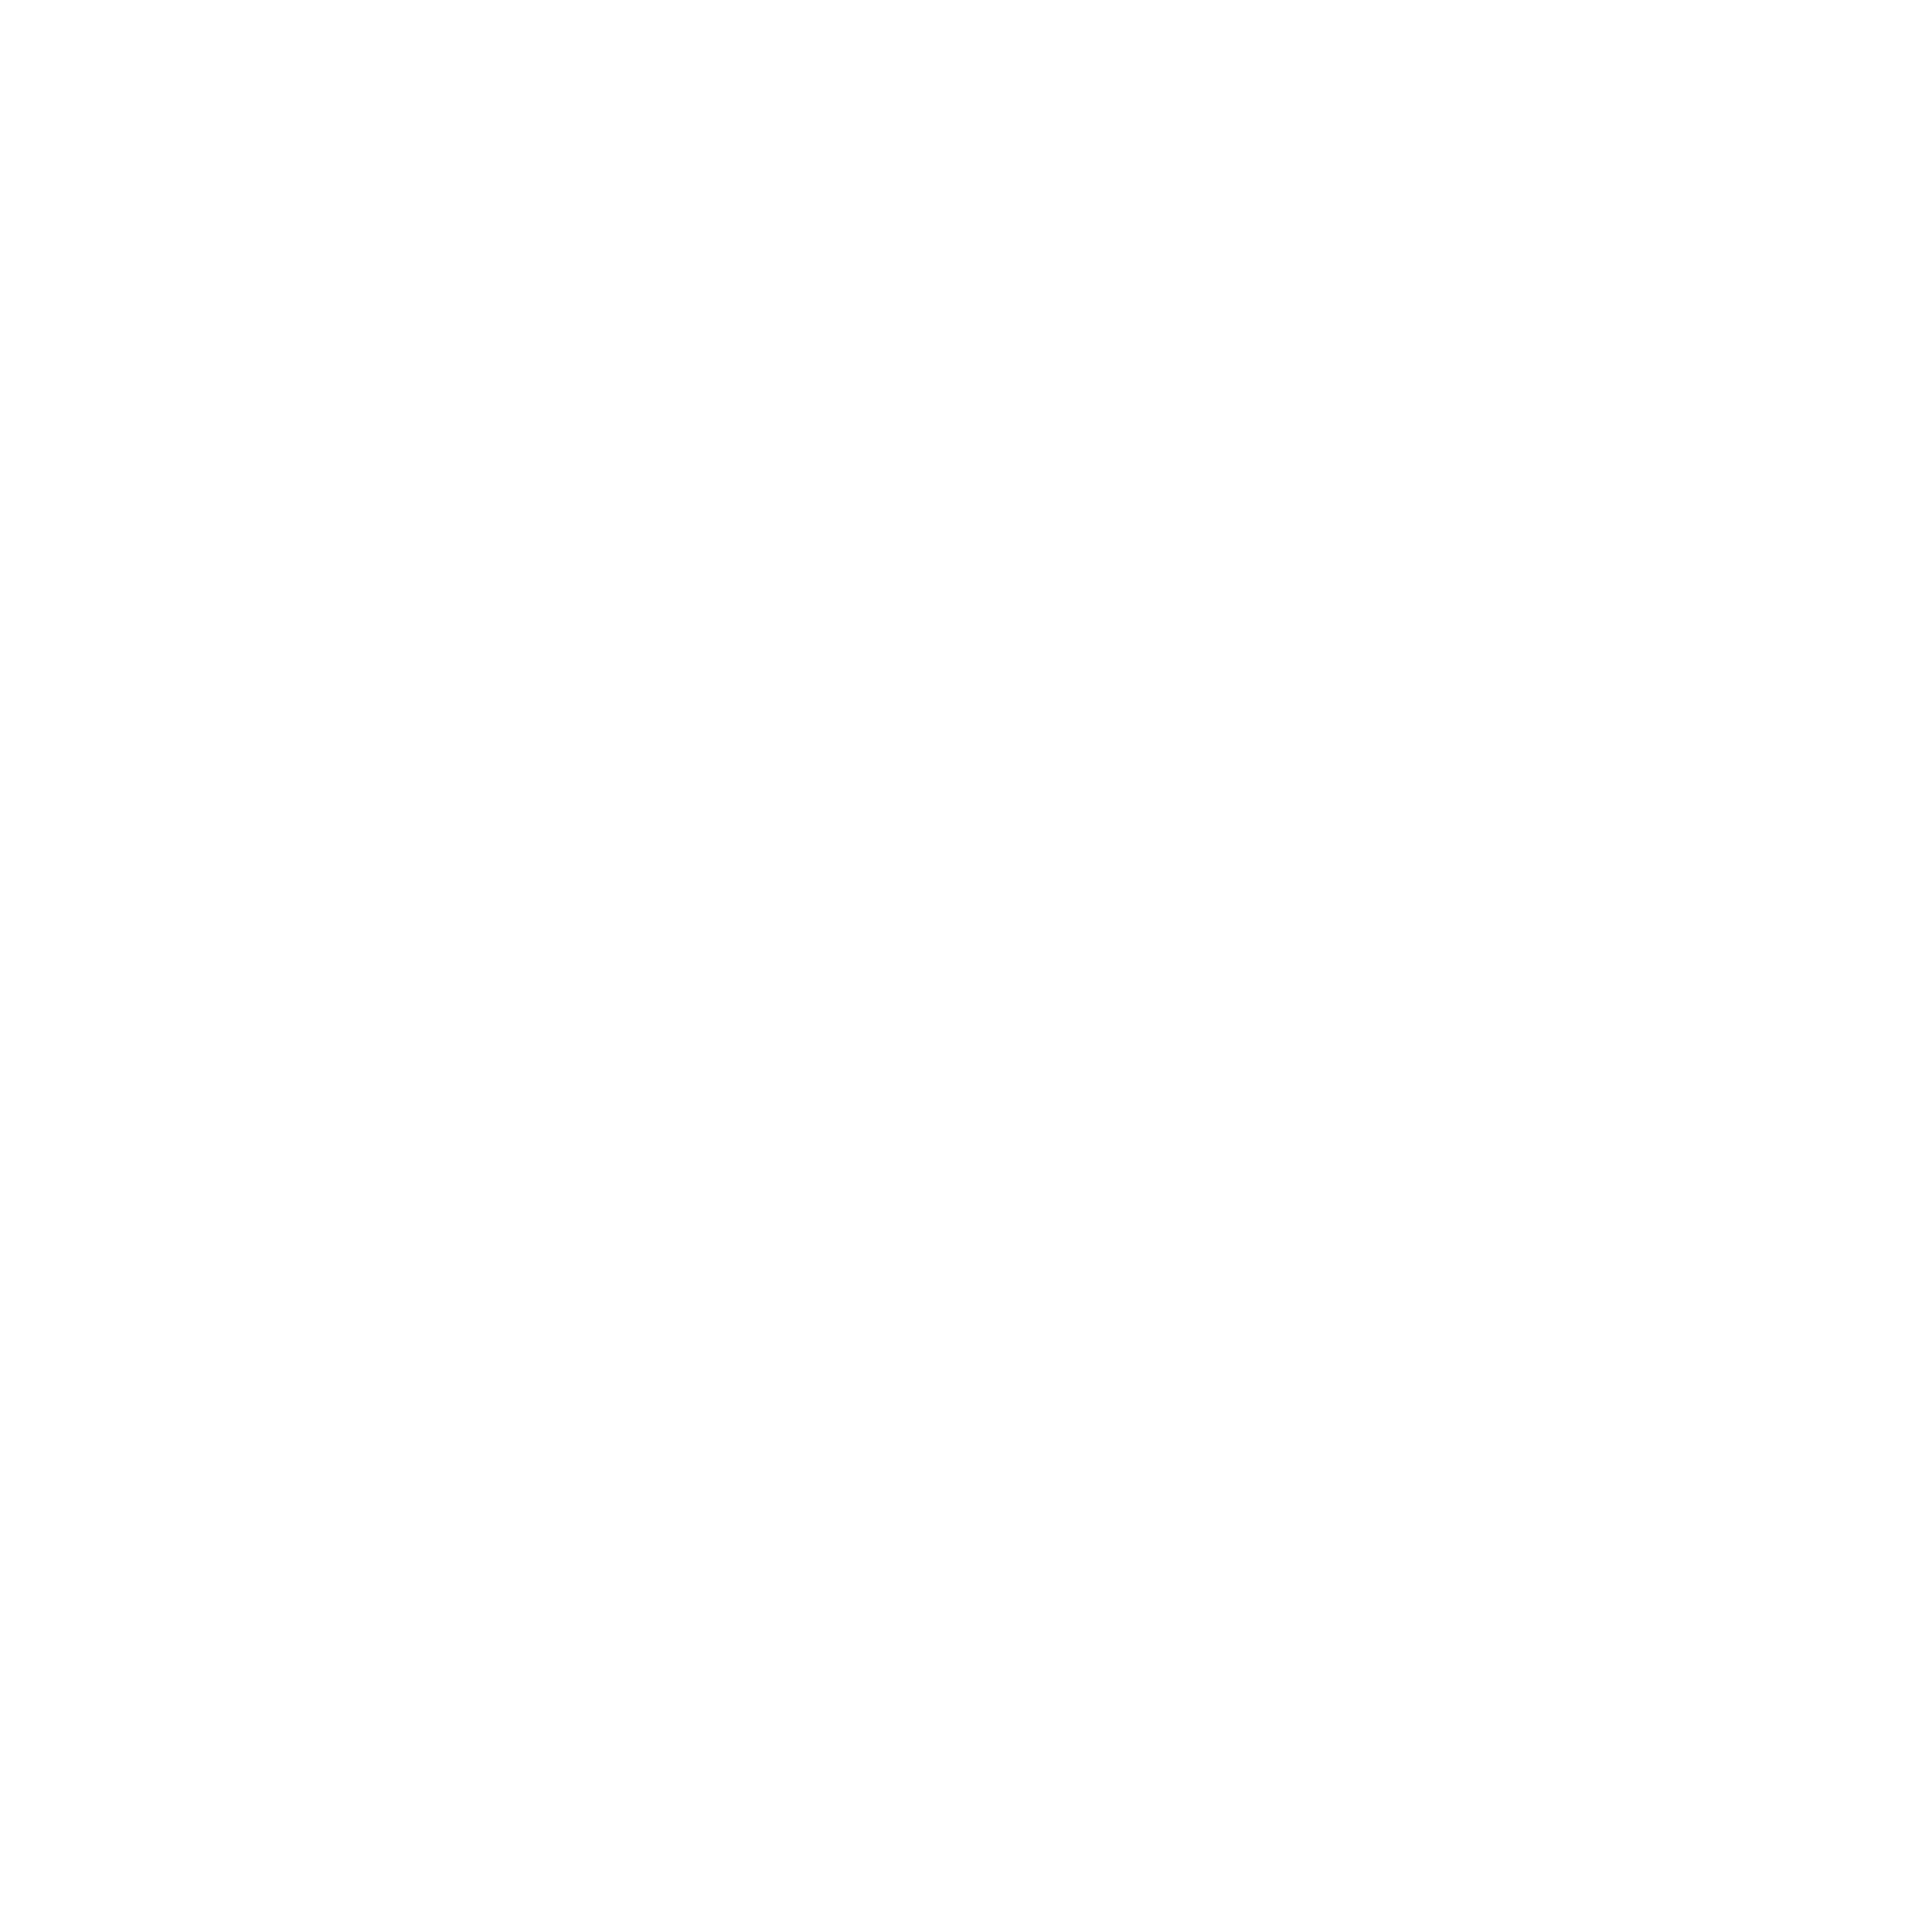 BEOUTER